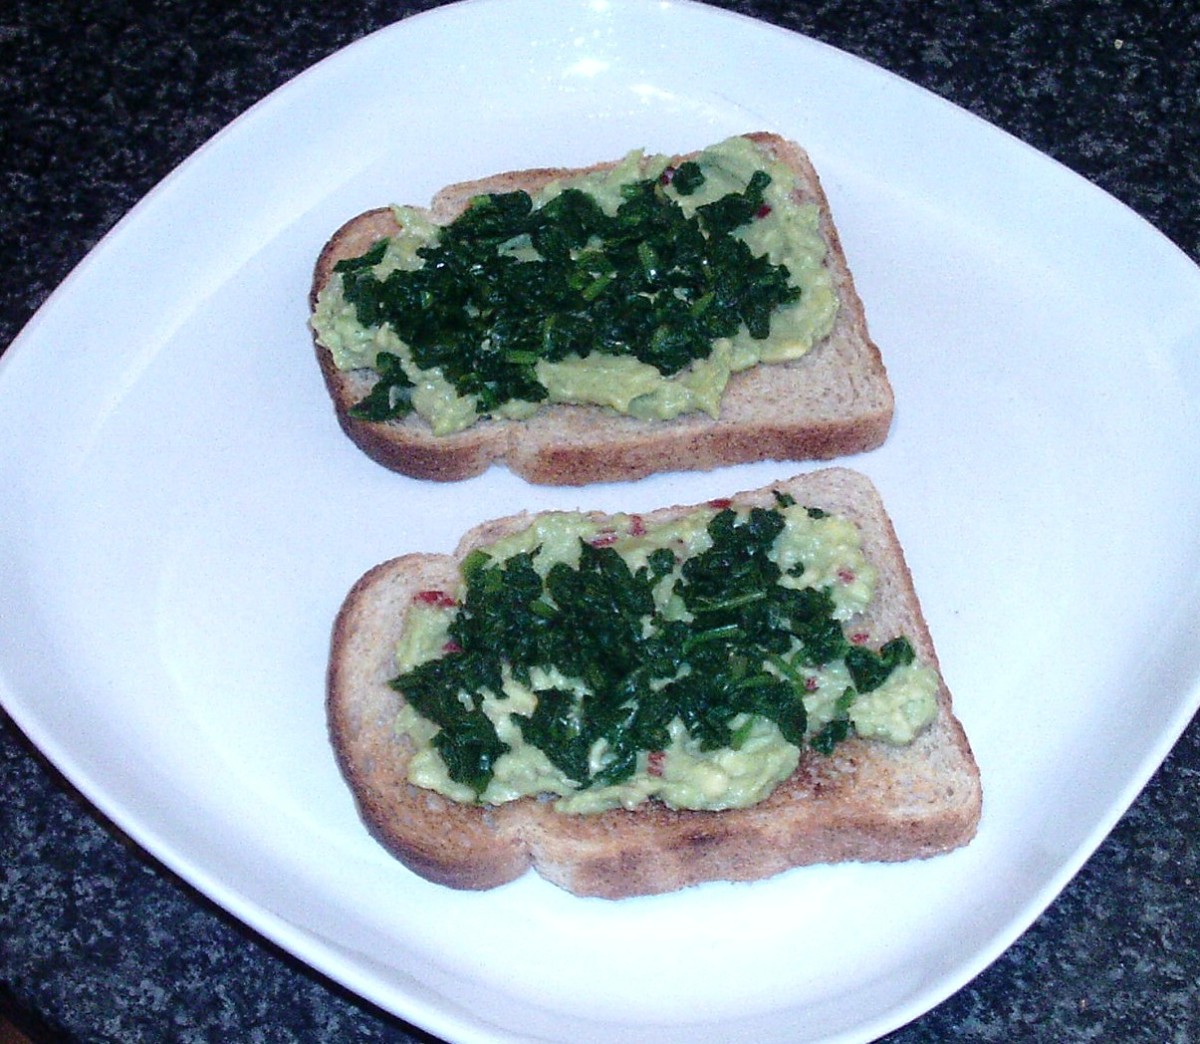 Spinach is scattered over guacamole on toast